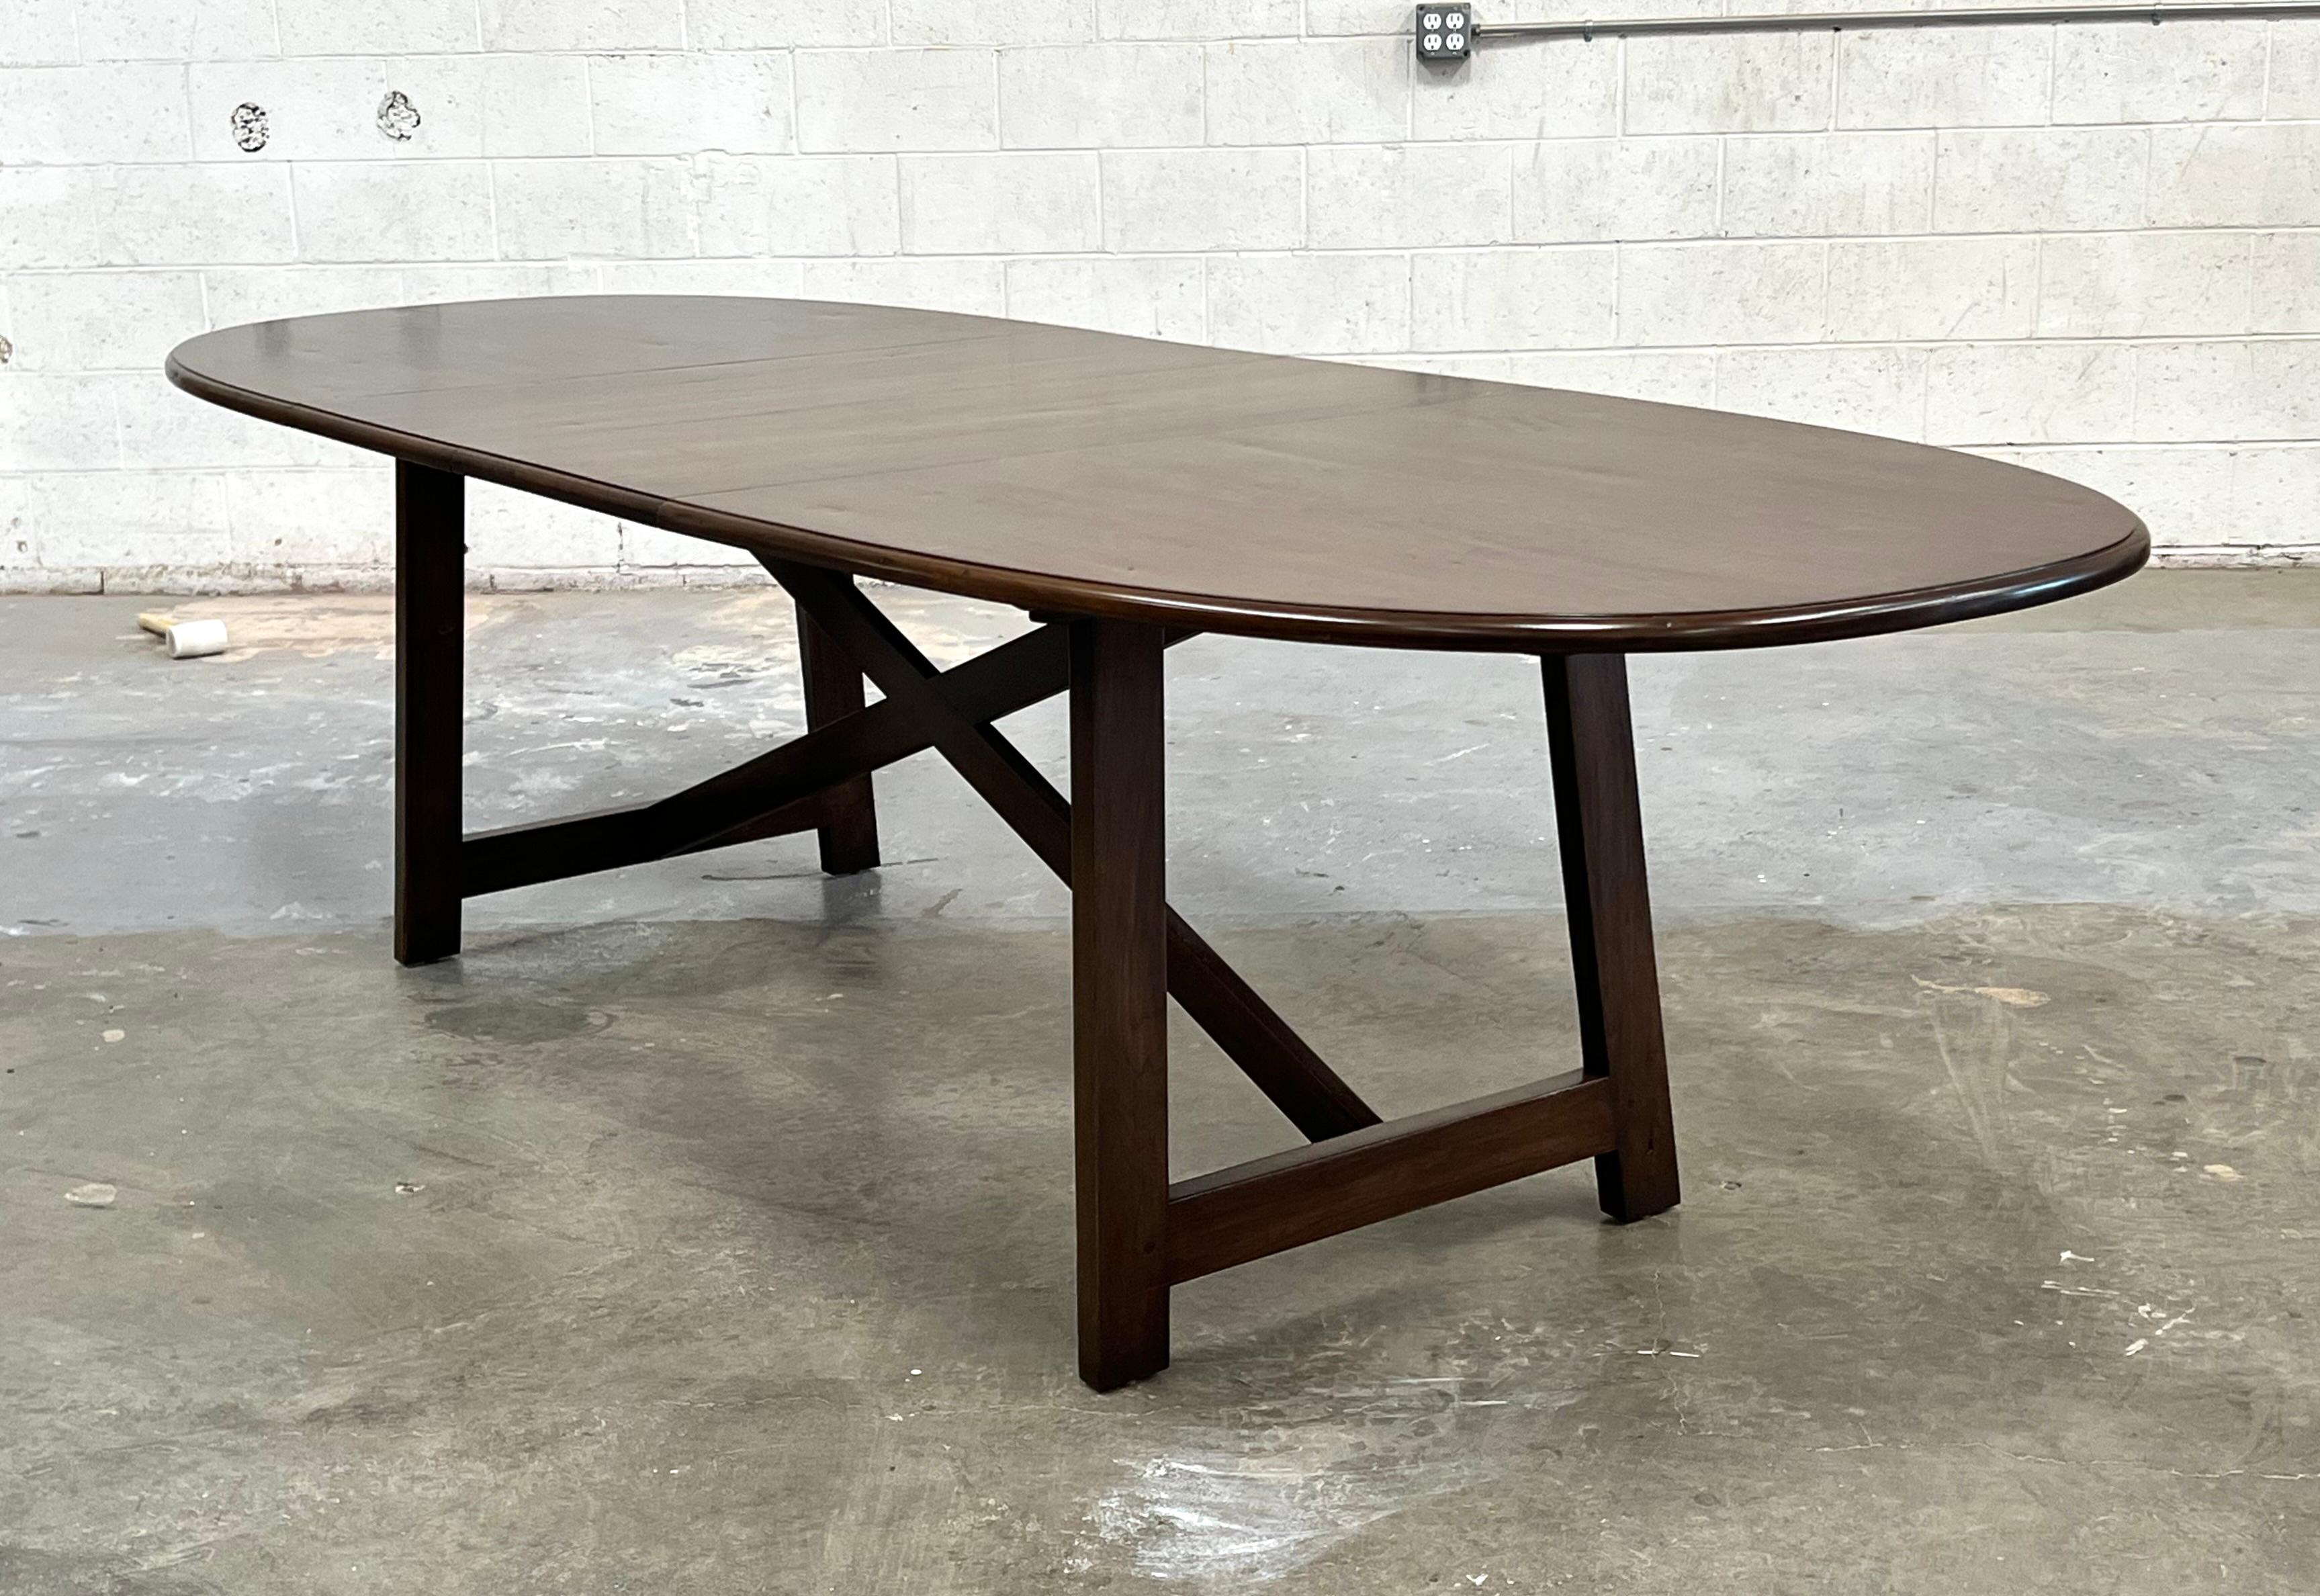 This walnut dining table expands from 84